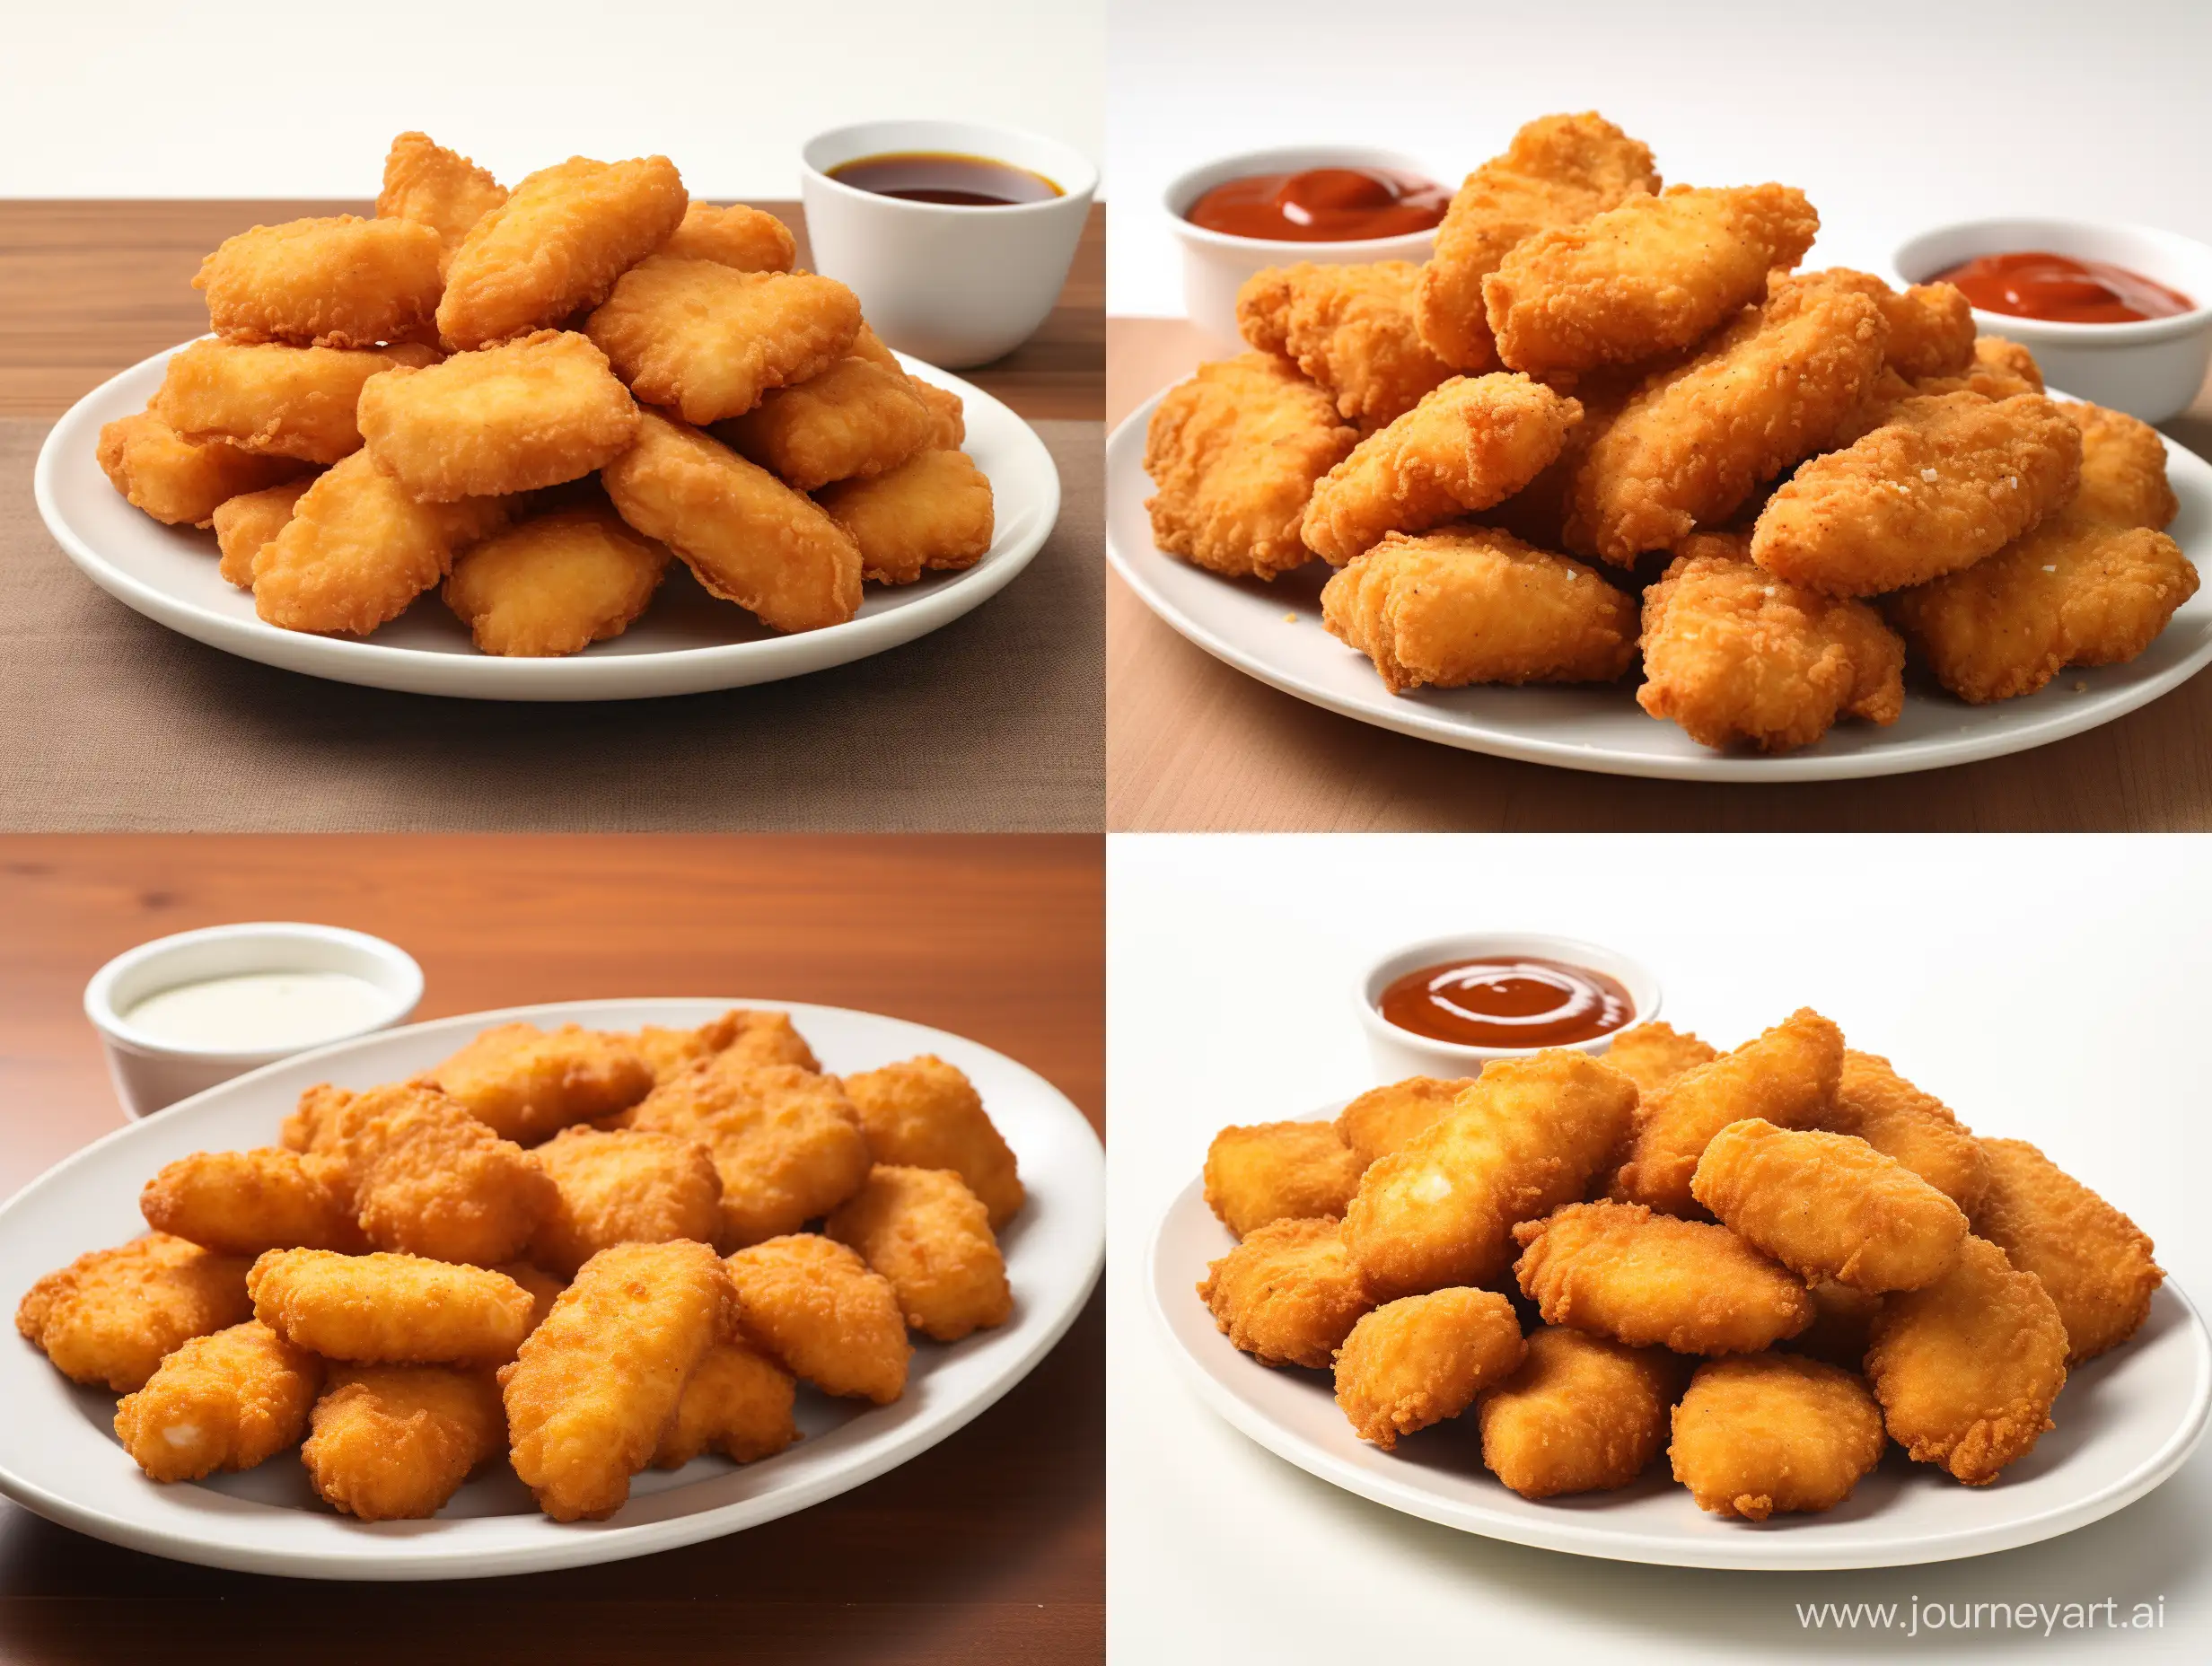 Delicious-Chicken-Nuggets-on-White-Plate-HighResolution-Closeup-Image